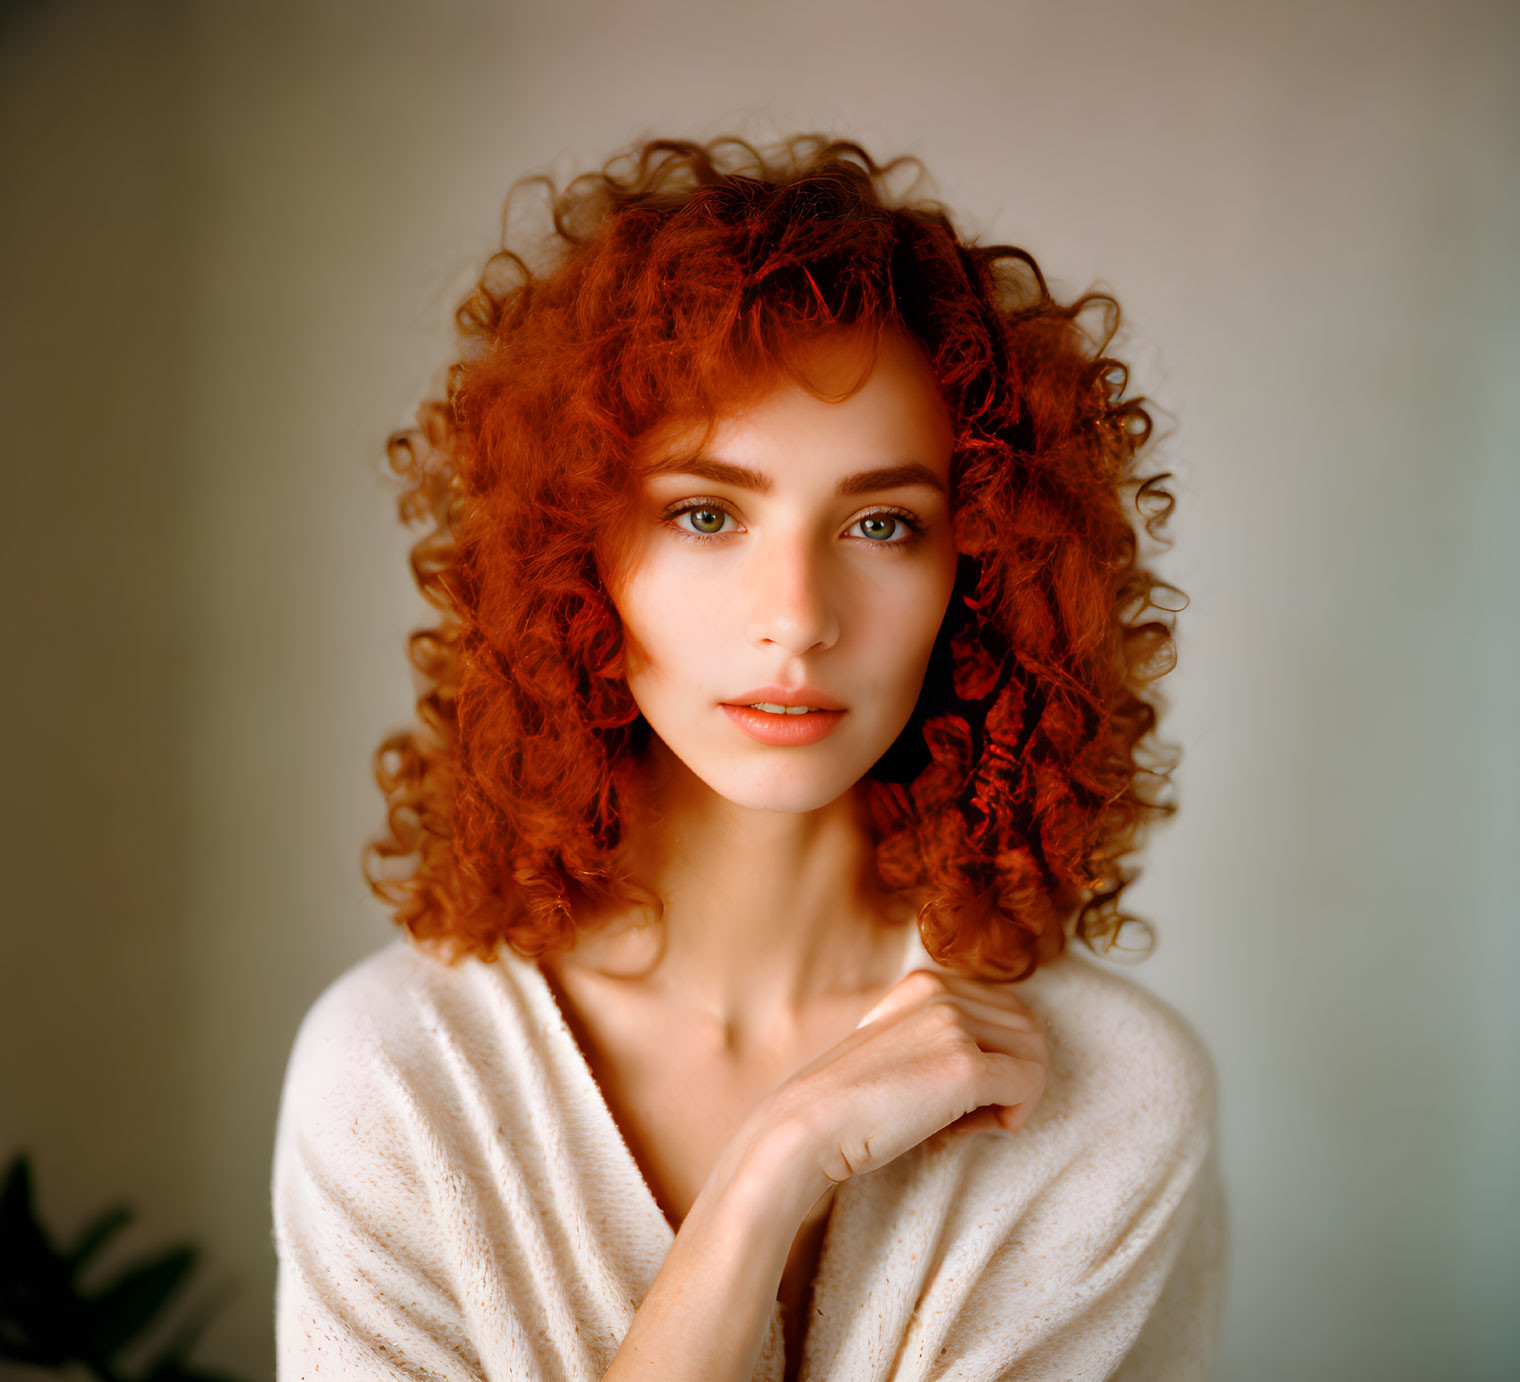 Curly Red-Haired Woman in White Top with Blue Eyes Portrait